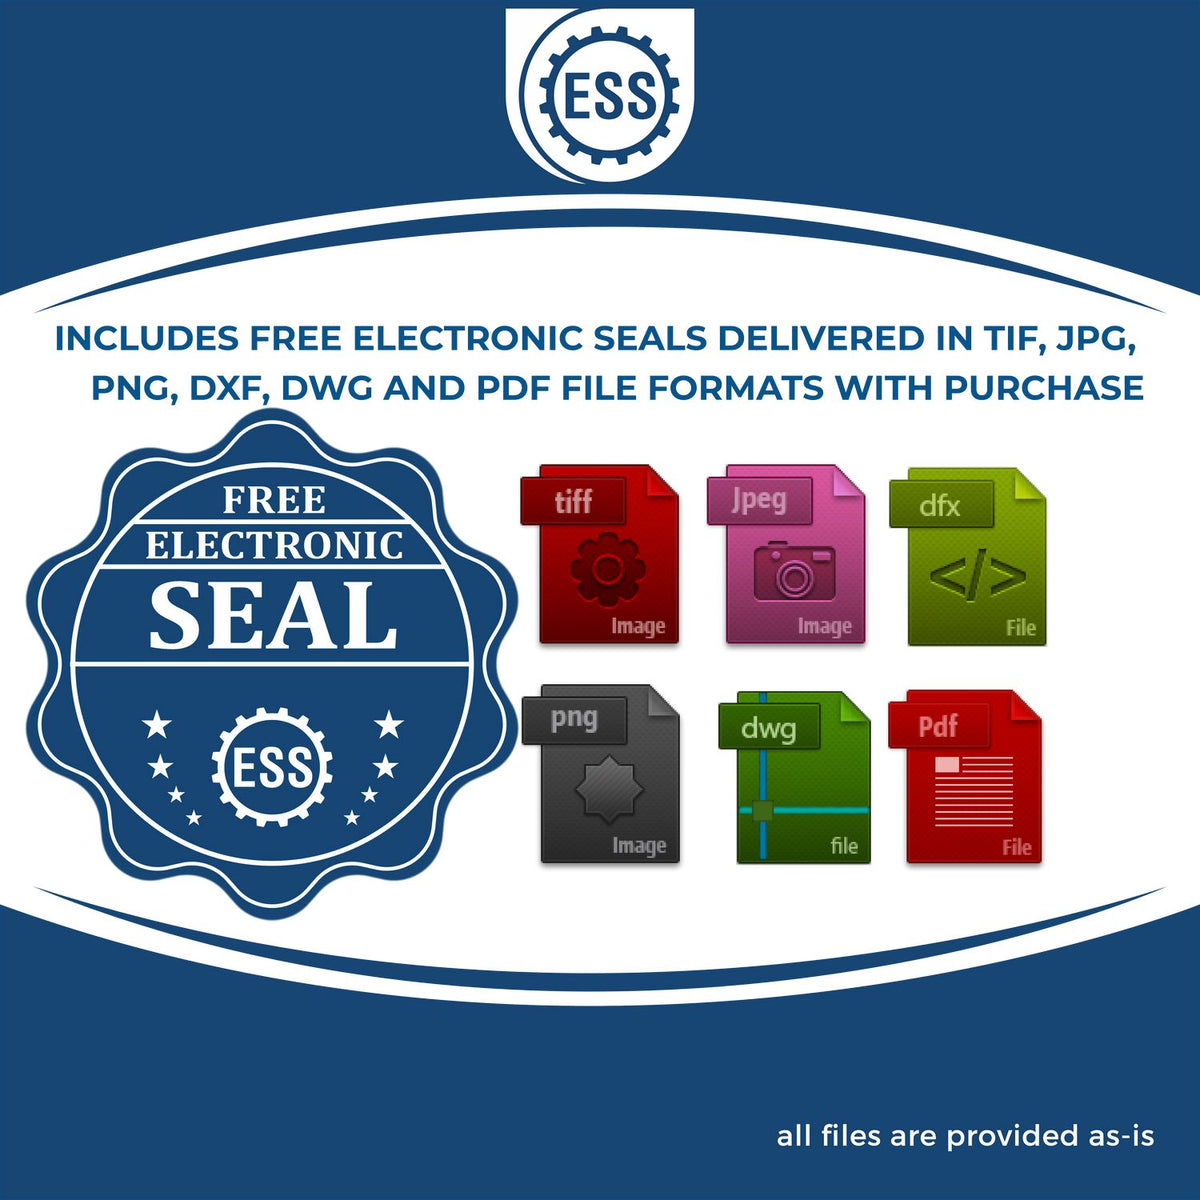 An infographic for the free electronic seal for the Premium MaxLight Pre-Inked Montana Geology Stamp illustrating the different file type icons such as DXF, DWG, TIF, JPG and PNG.